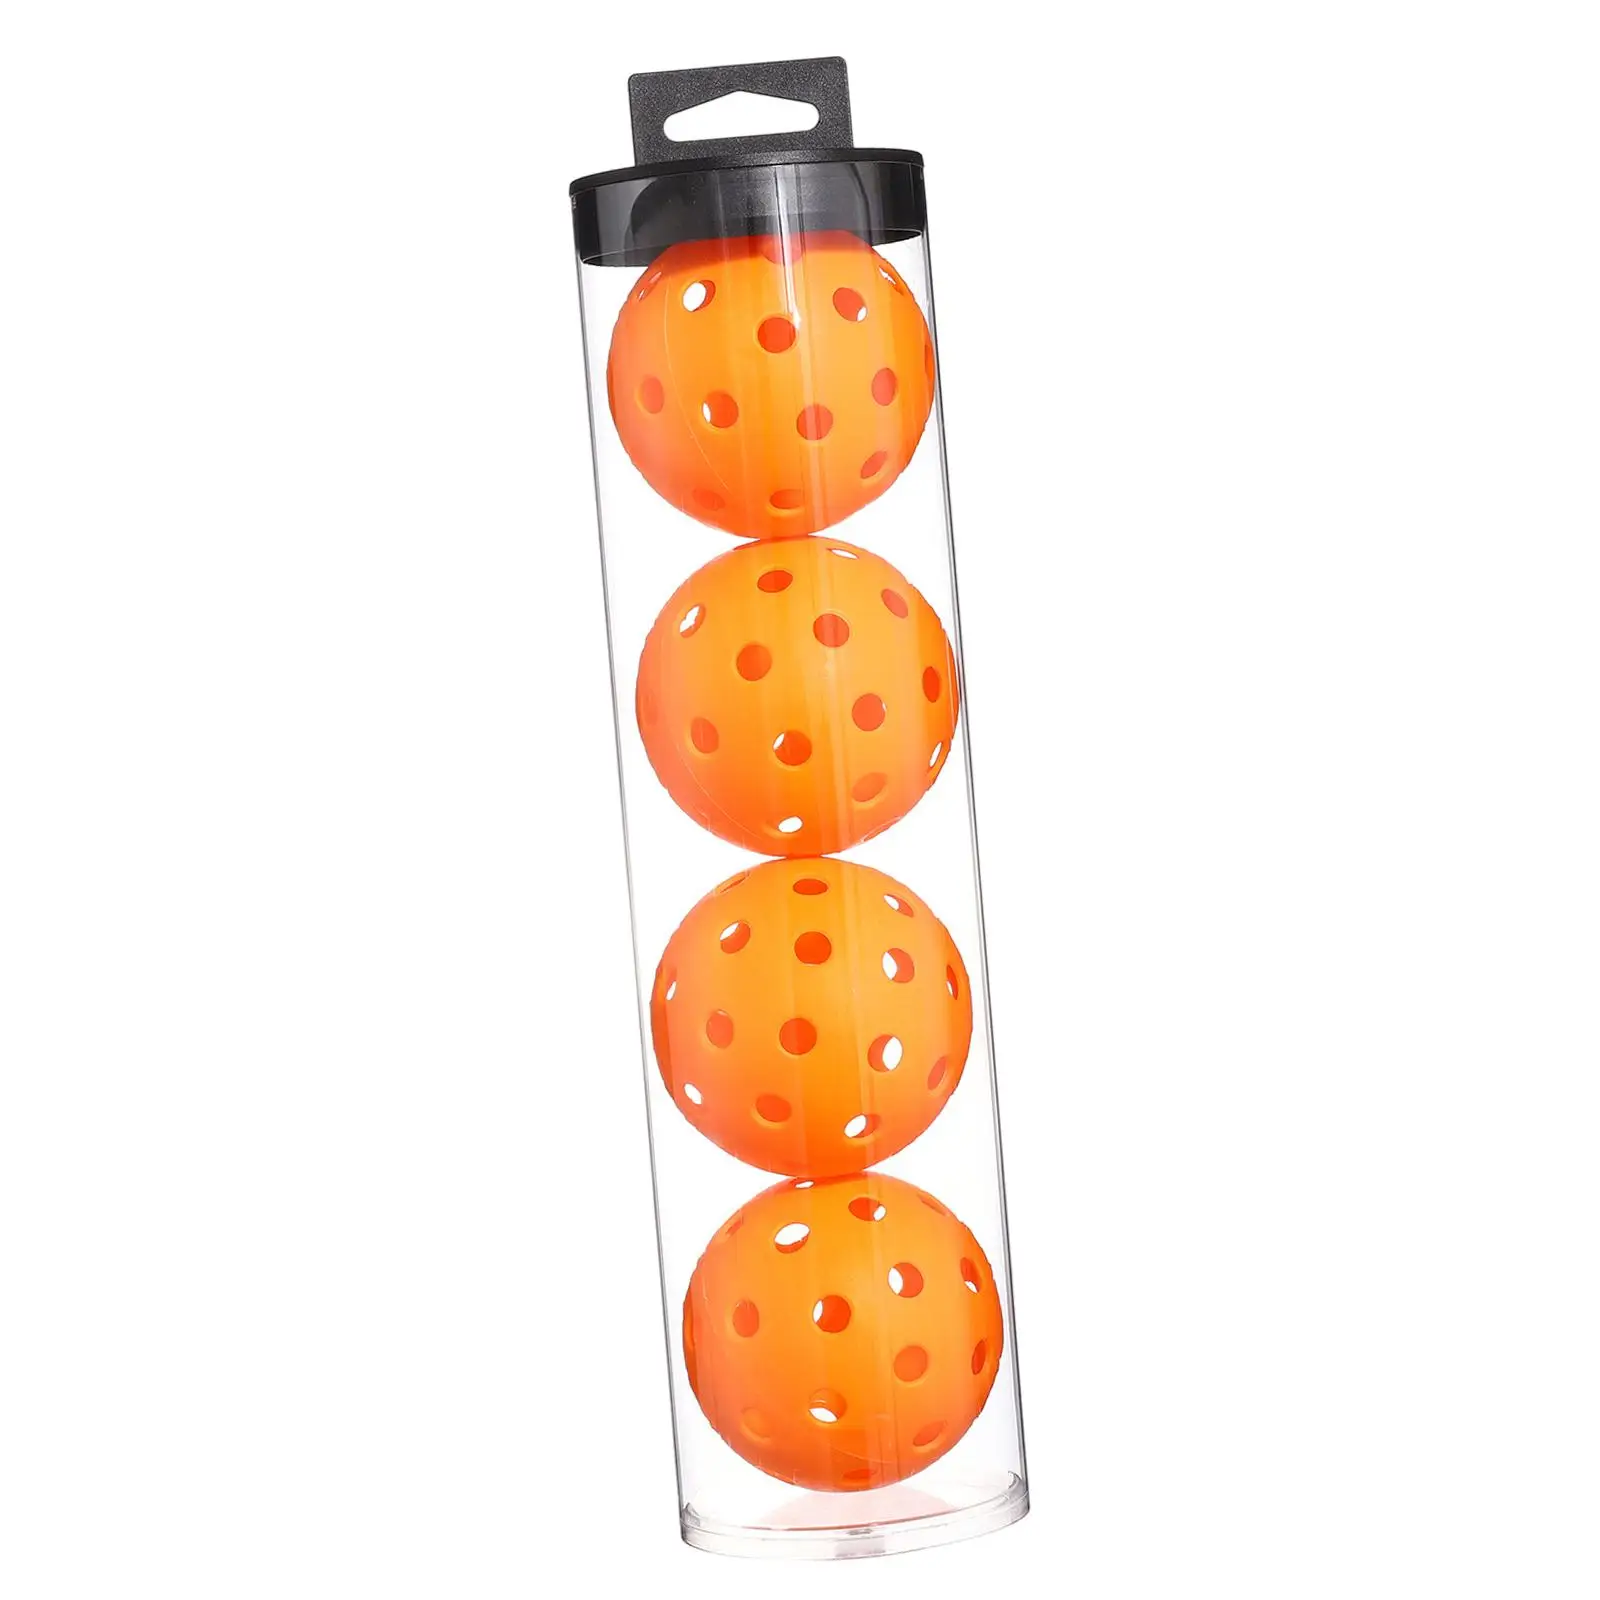 4x Pickleball Balls Super Hard Professional Pickle Ball for Sanctioned Tournament Play Outdoor Training Pickleball Accessories